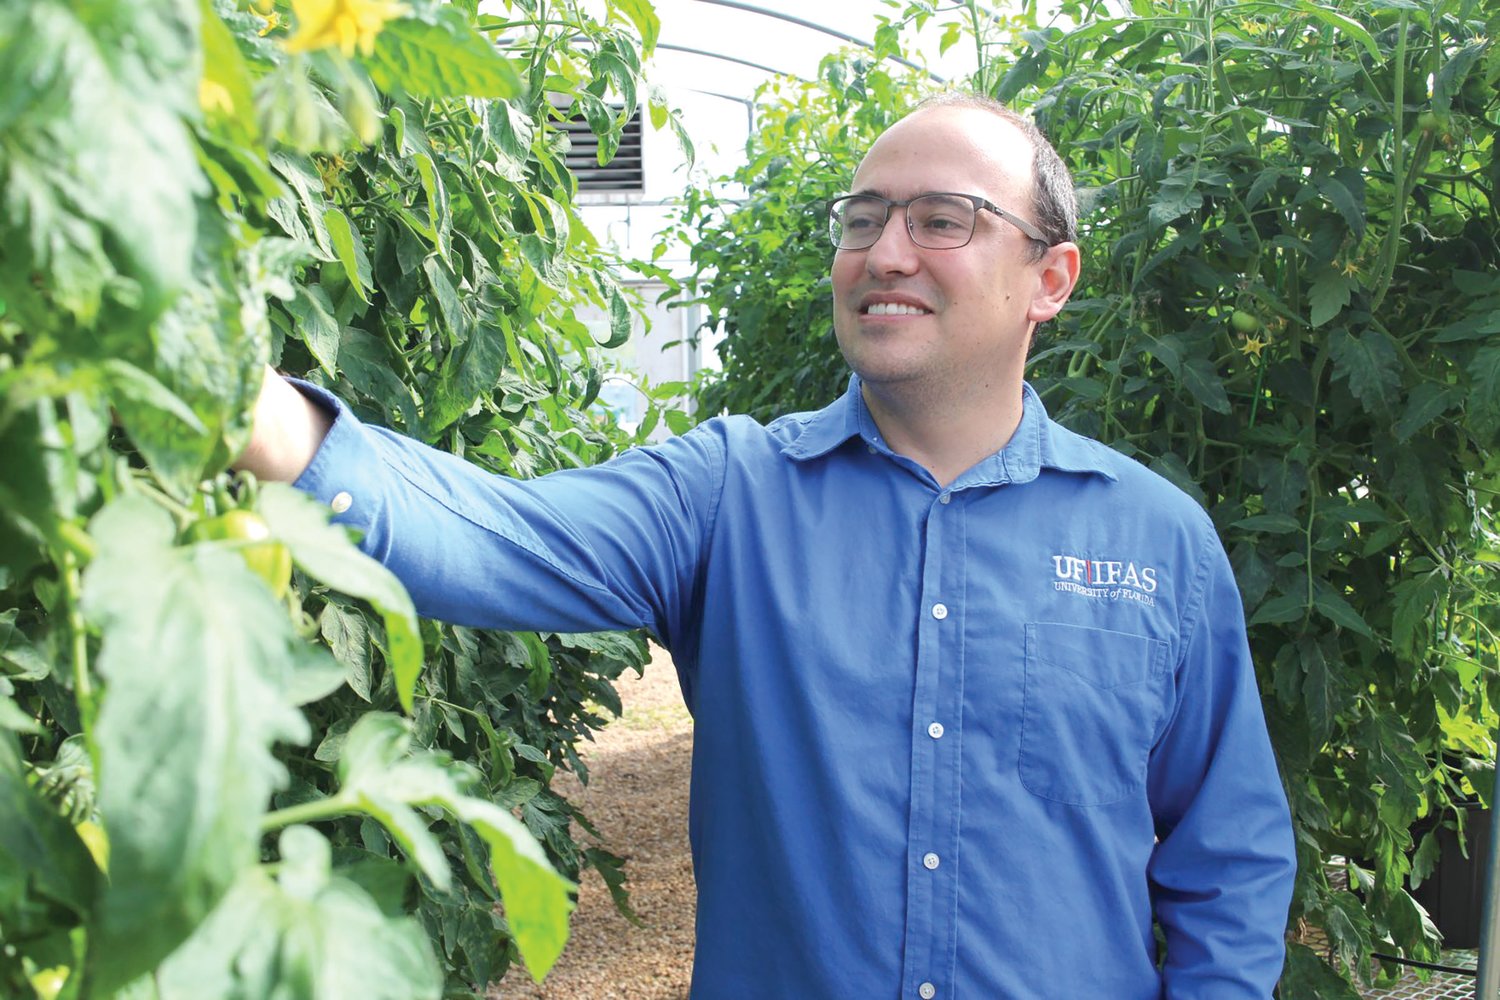 Dr. Marcio Resende, UF/IFAS assistant professor of horticultural sciences, is seen in his greenhouse at the main UF campus in Gainesville.